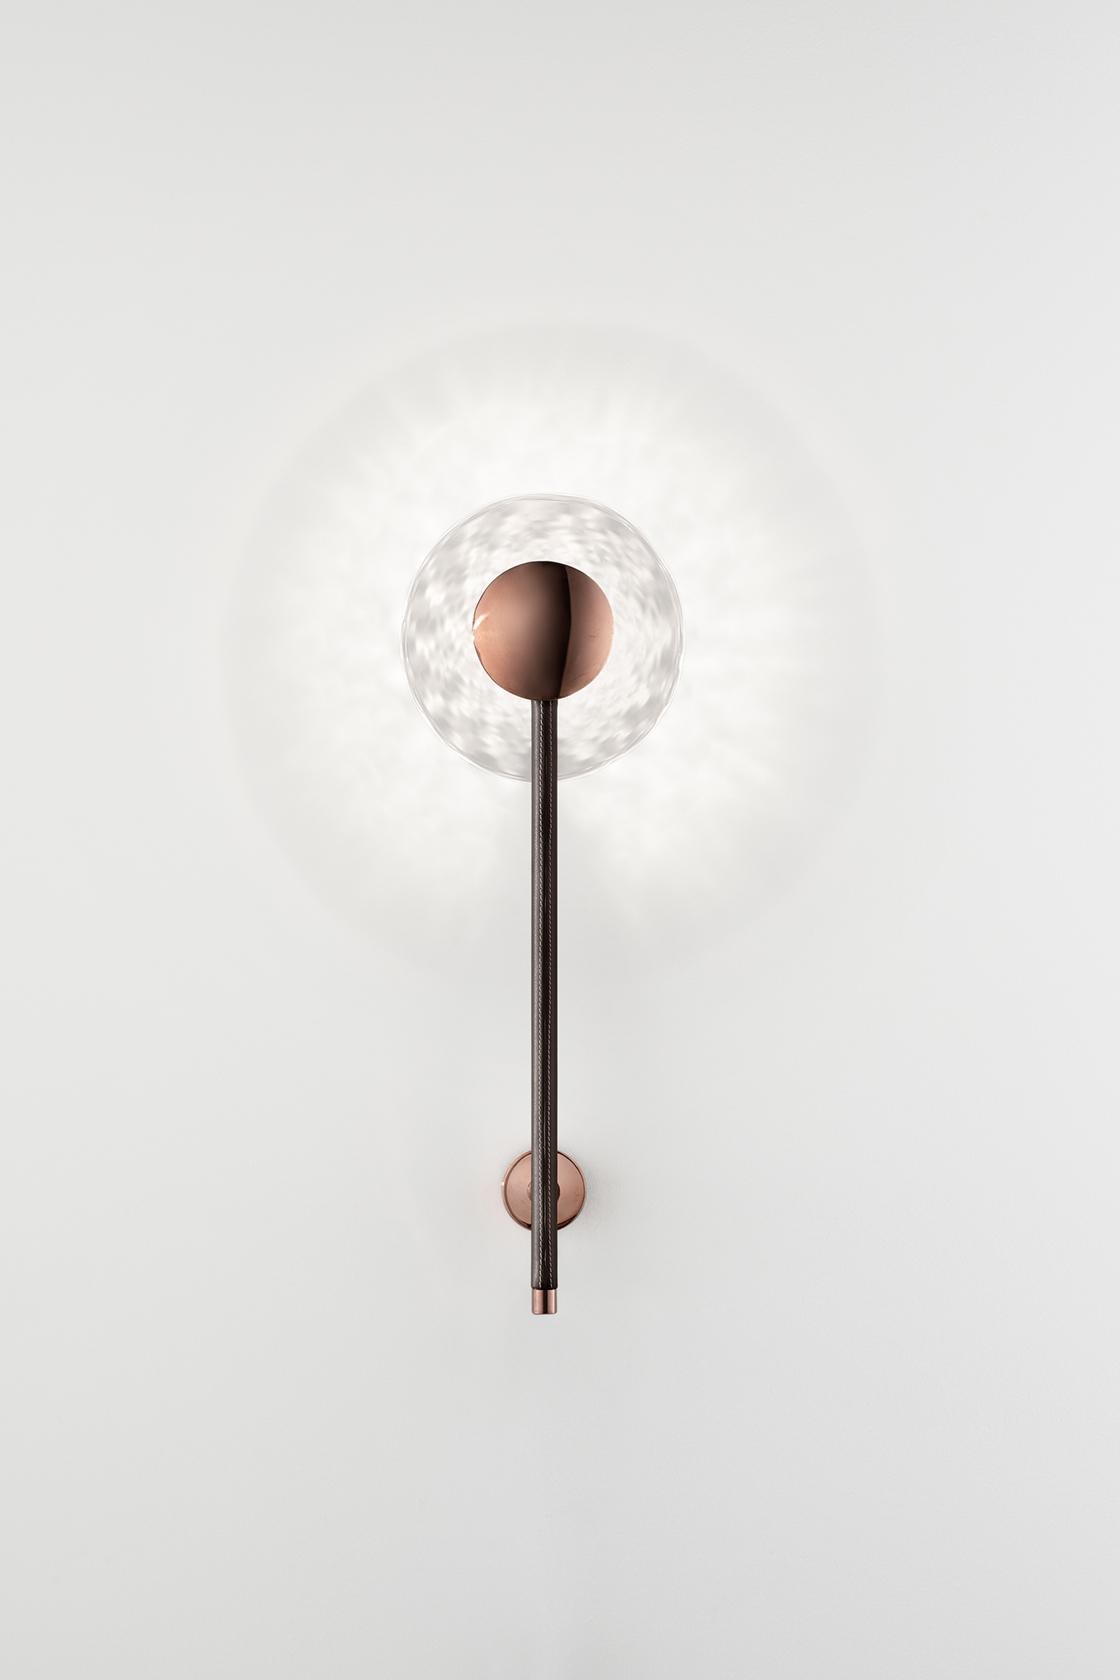 Hand-Crafted Rullo, LED Wall Lamp Consisting of a Coated Brass Stem and Trasparent Glass Disc For Sale